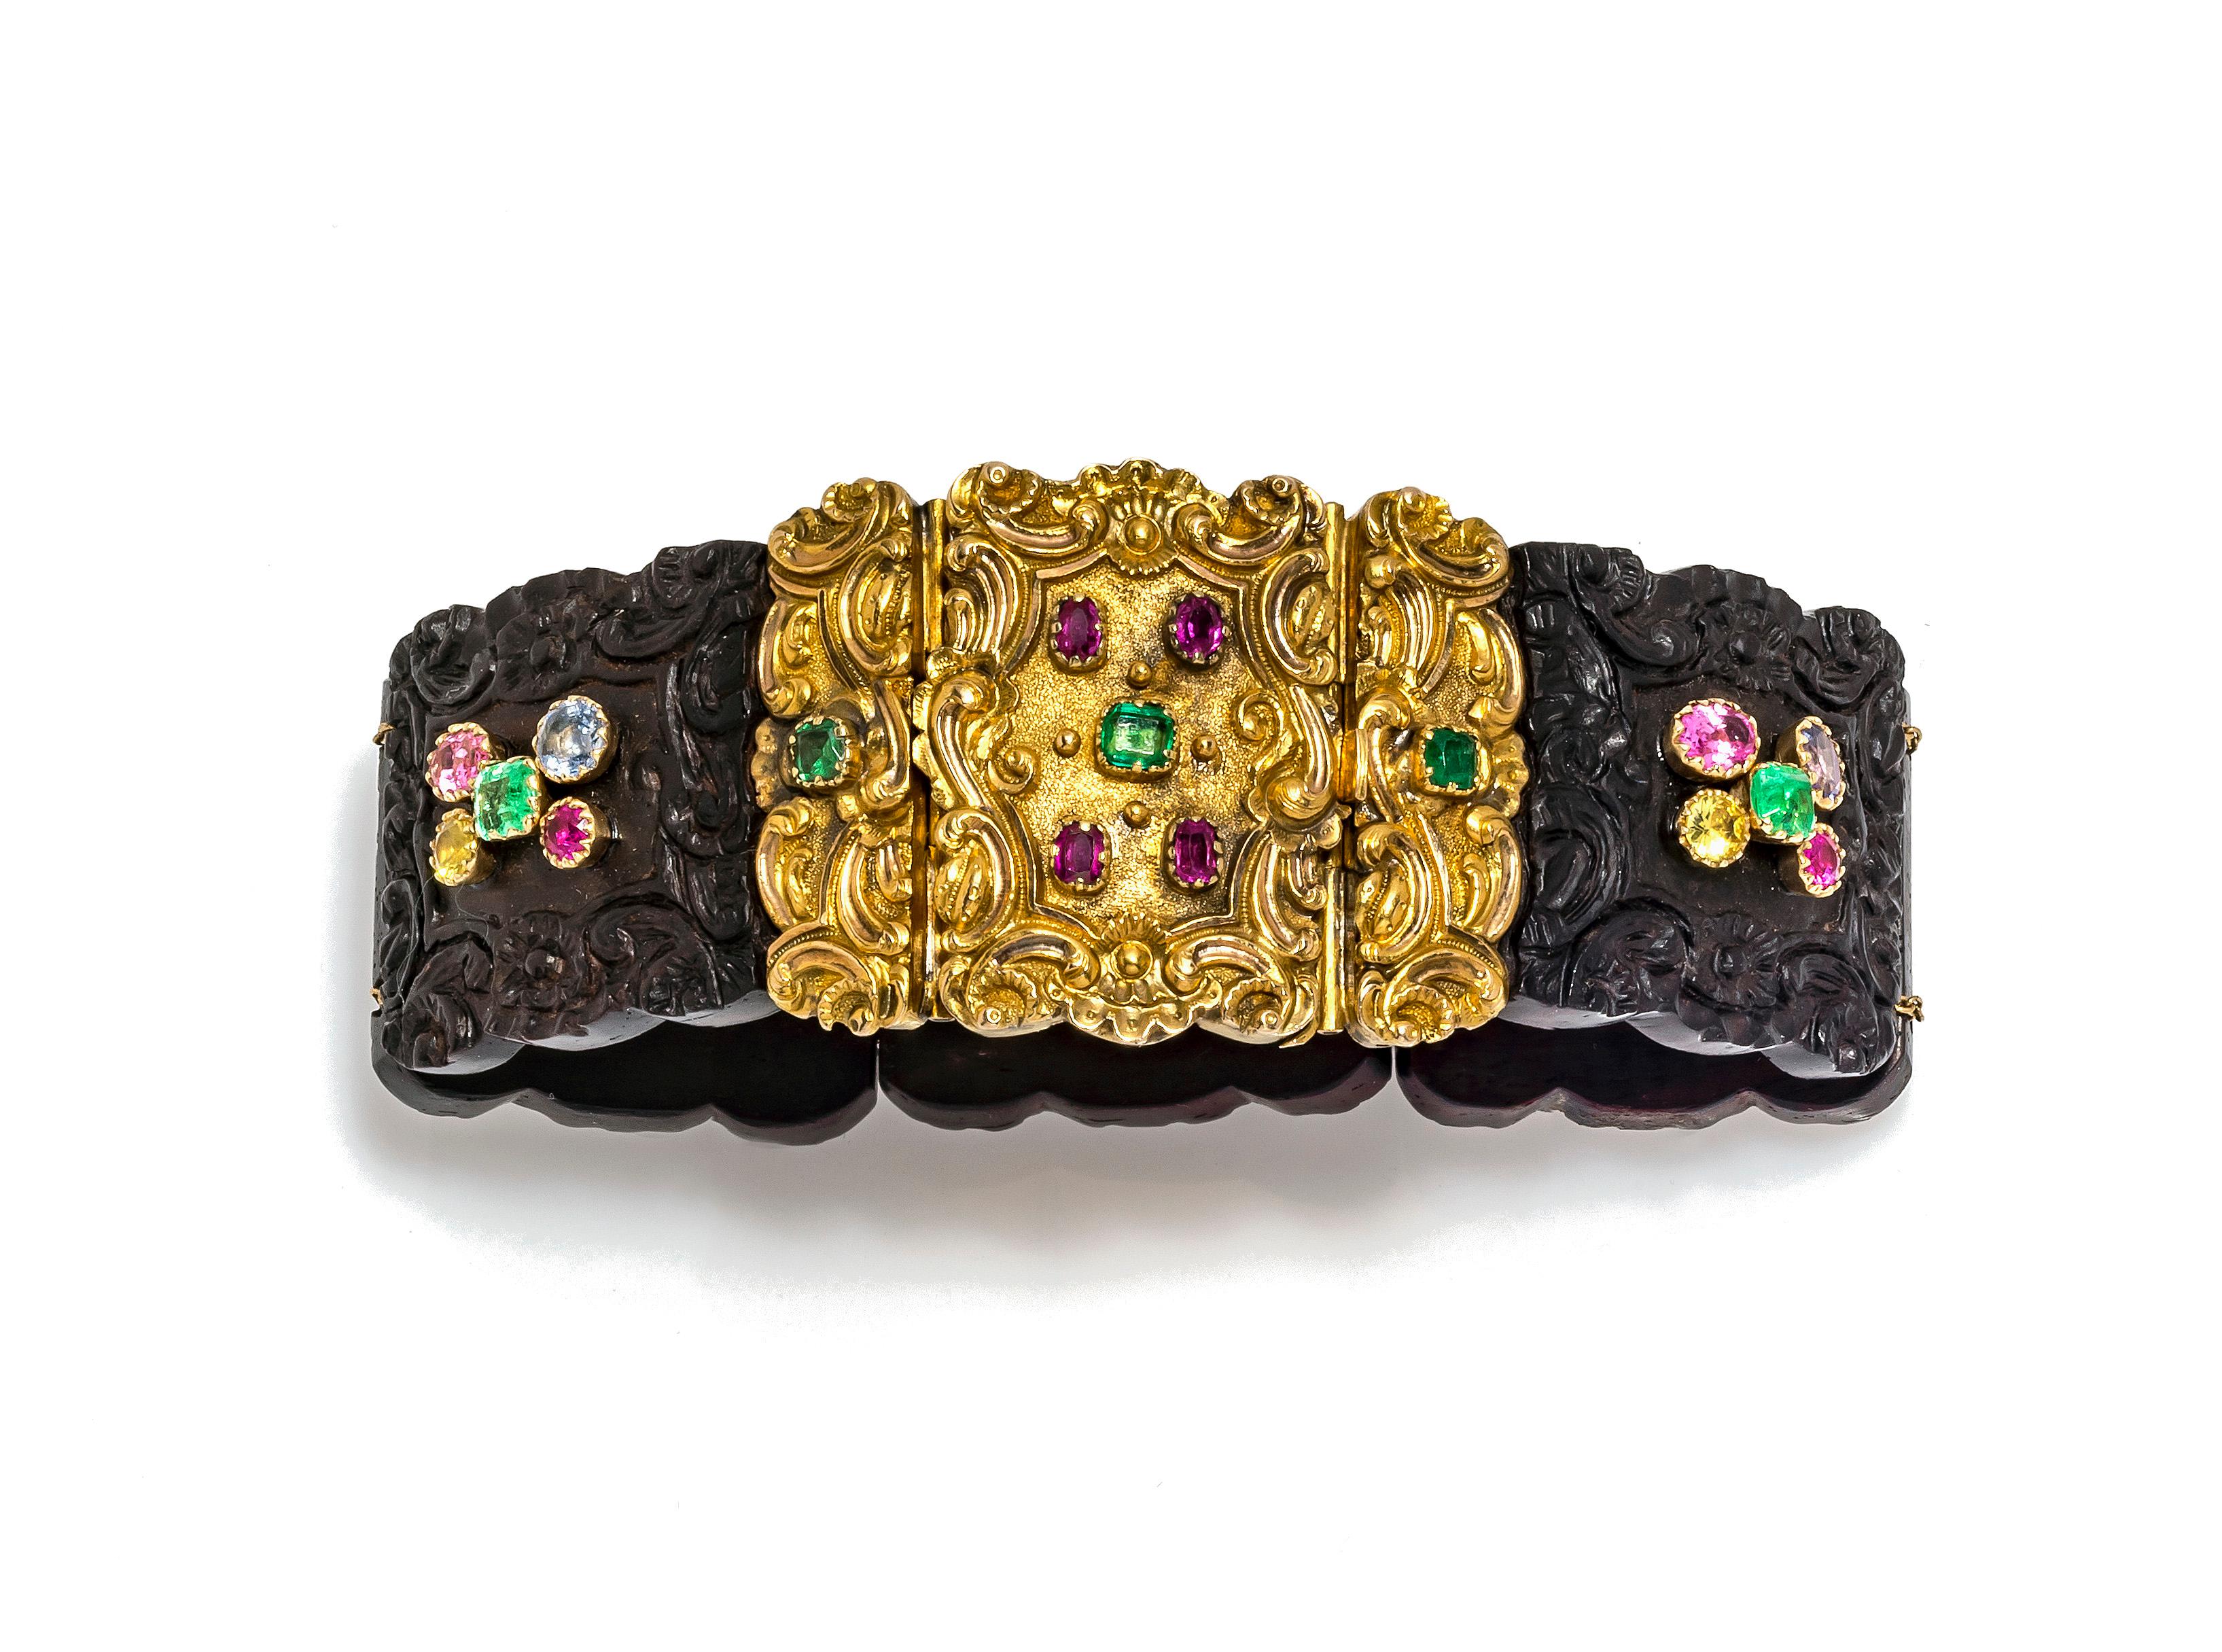 This extraordinary bracelet has been handcrafted around 1825.
It is most likely the work of an english workshop. Five delicately carved wooden segments are threaded onto two gold chains and secured in an ornamental gold clasp.
The clasp is set with